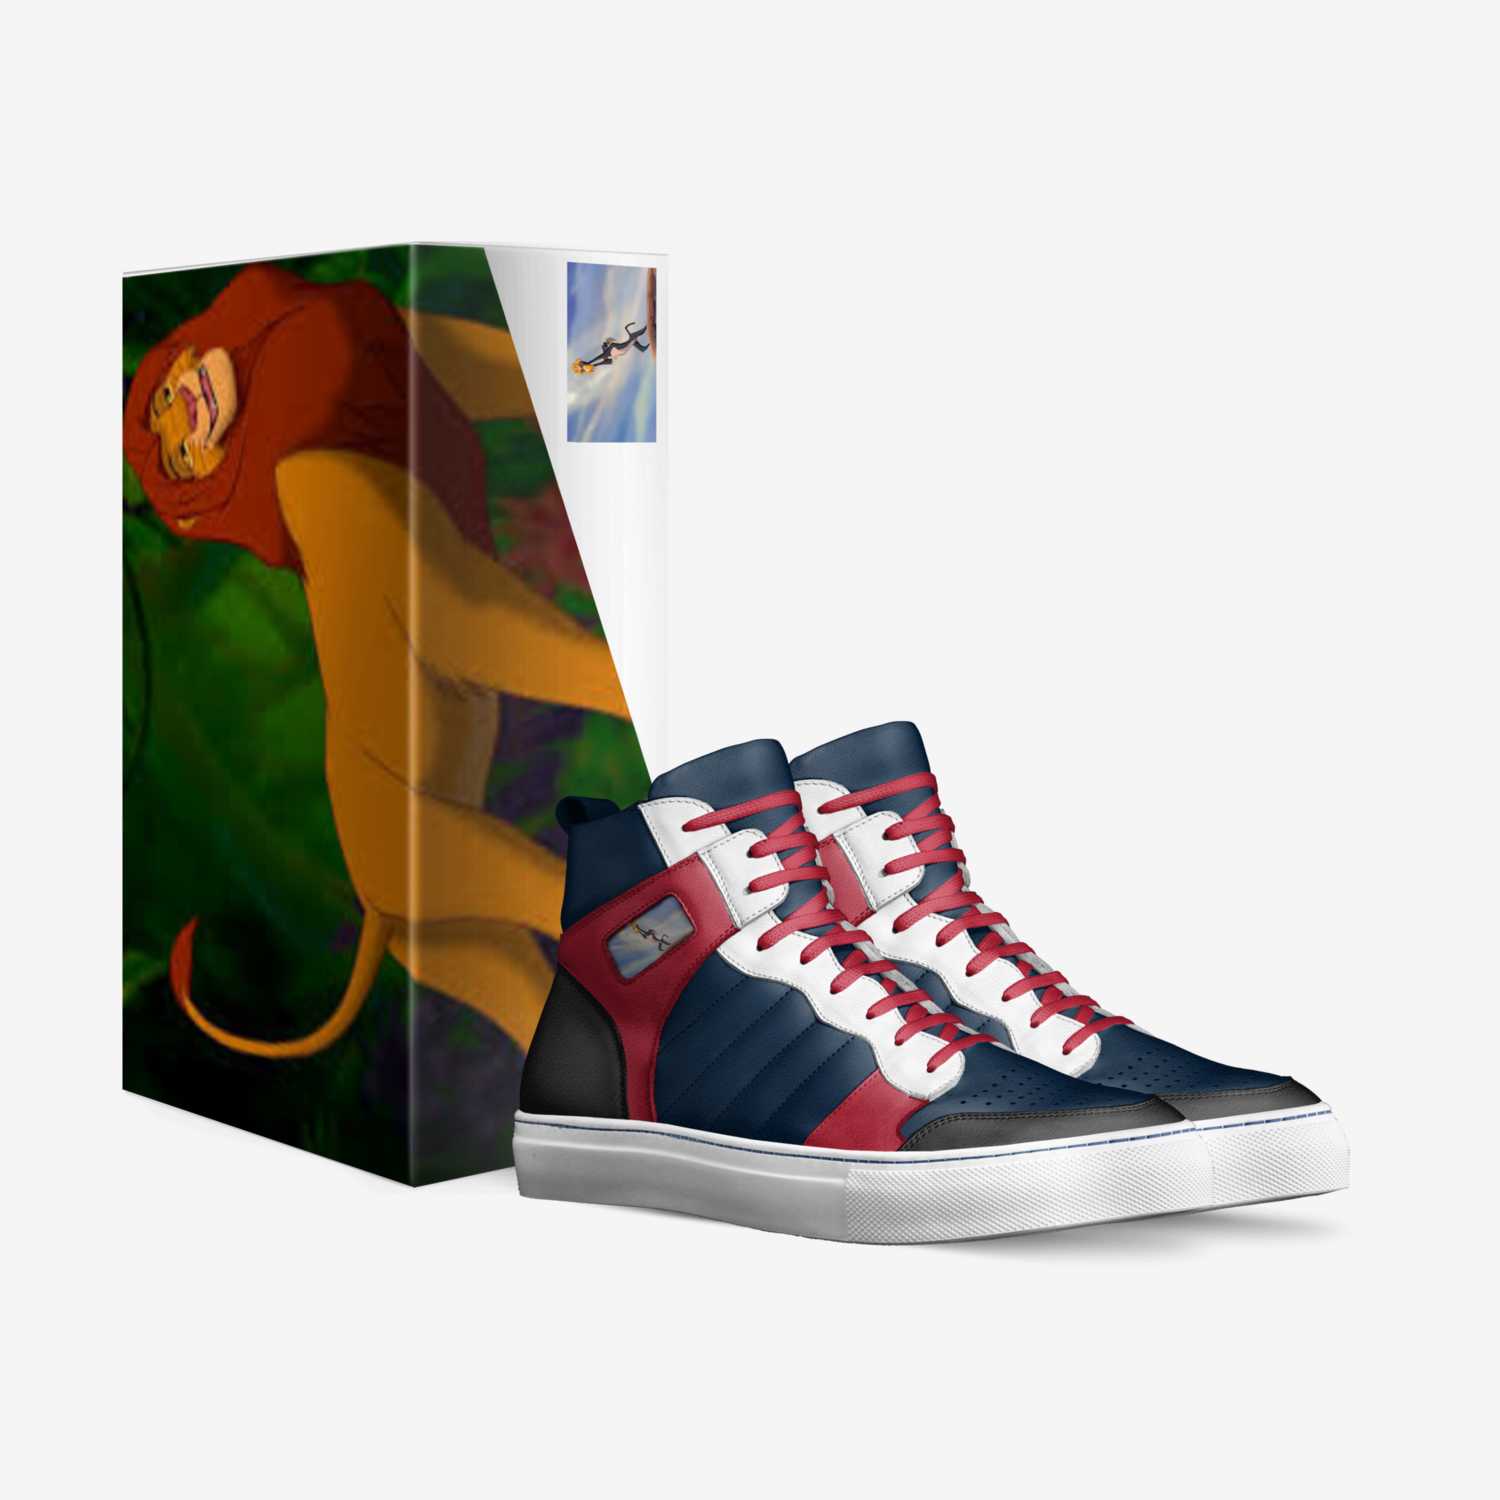 Simba 1's custom made in Italy shoes by Keenan Hobbs | Box view